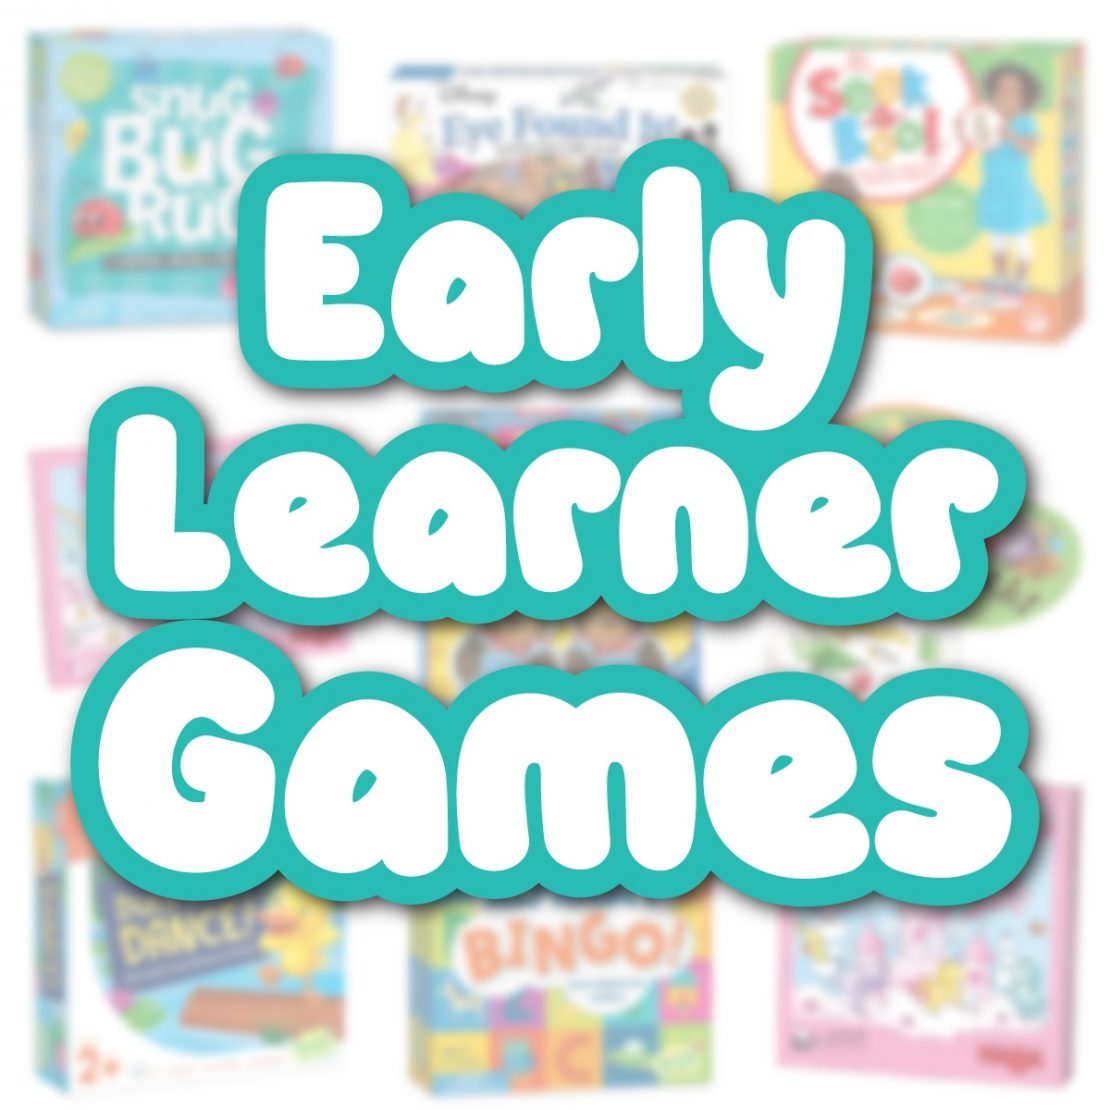 Early Learner Games Everyone Will Want to Play!